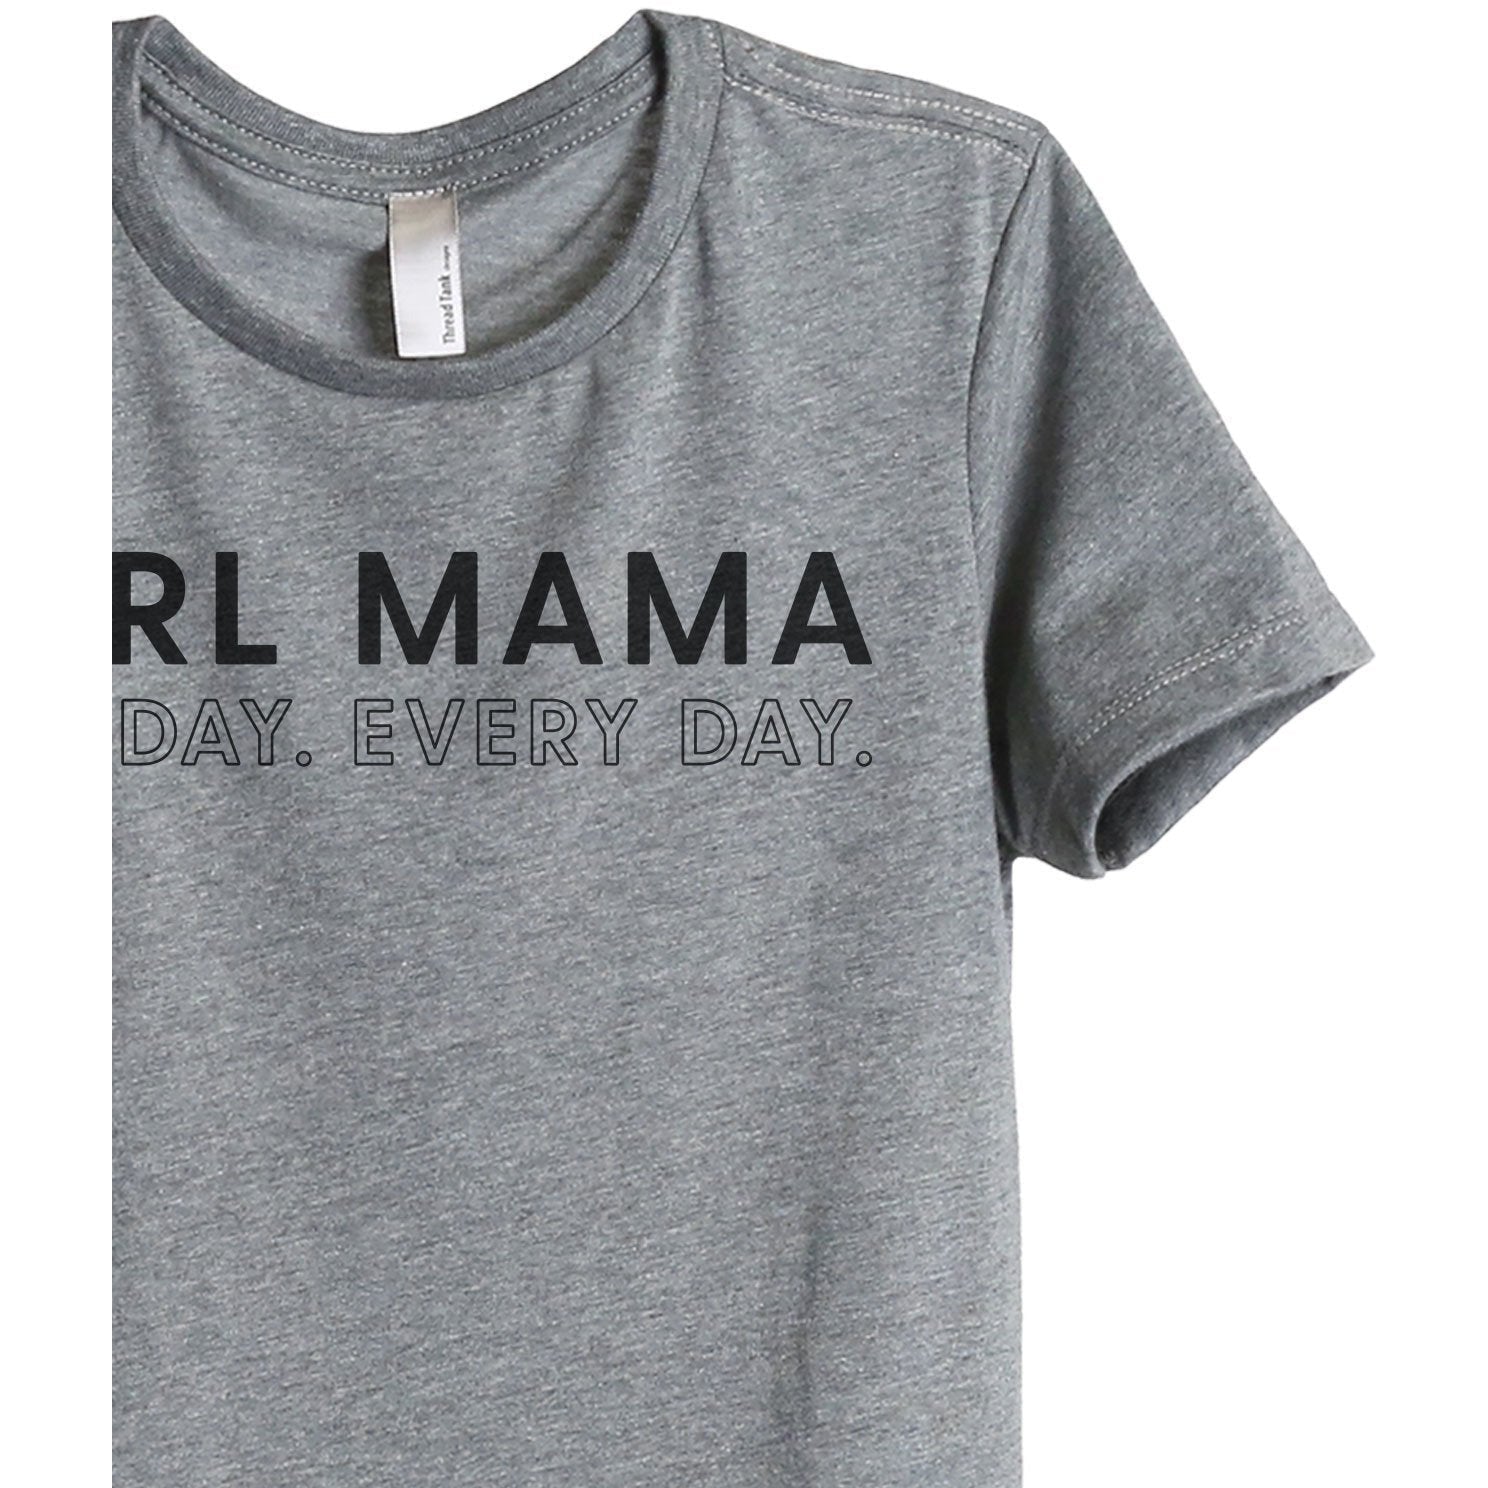 Girl Mama All Day Every Day Women's Relaxed Crewneck T-Shirt Top Tee Heather Grey Zoom Details
